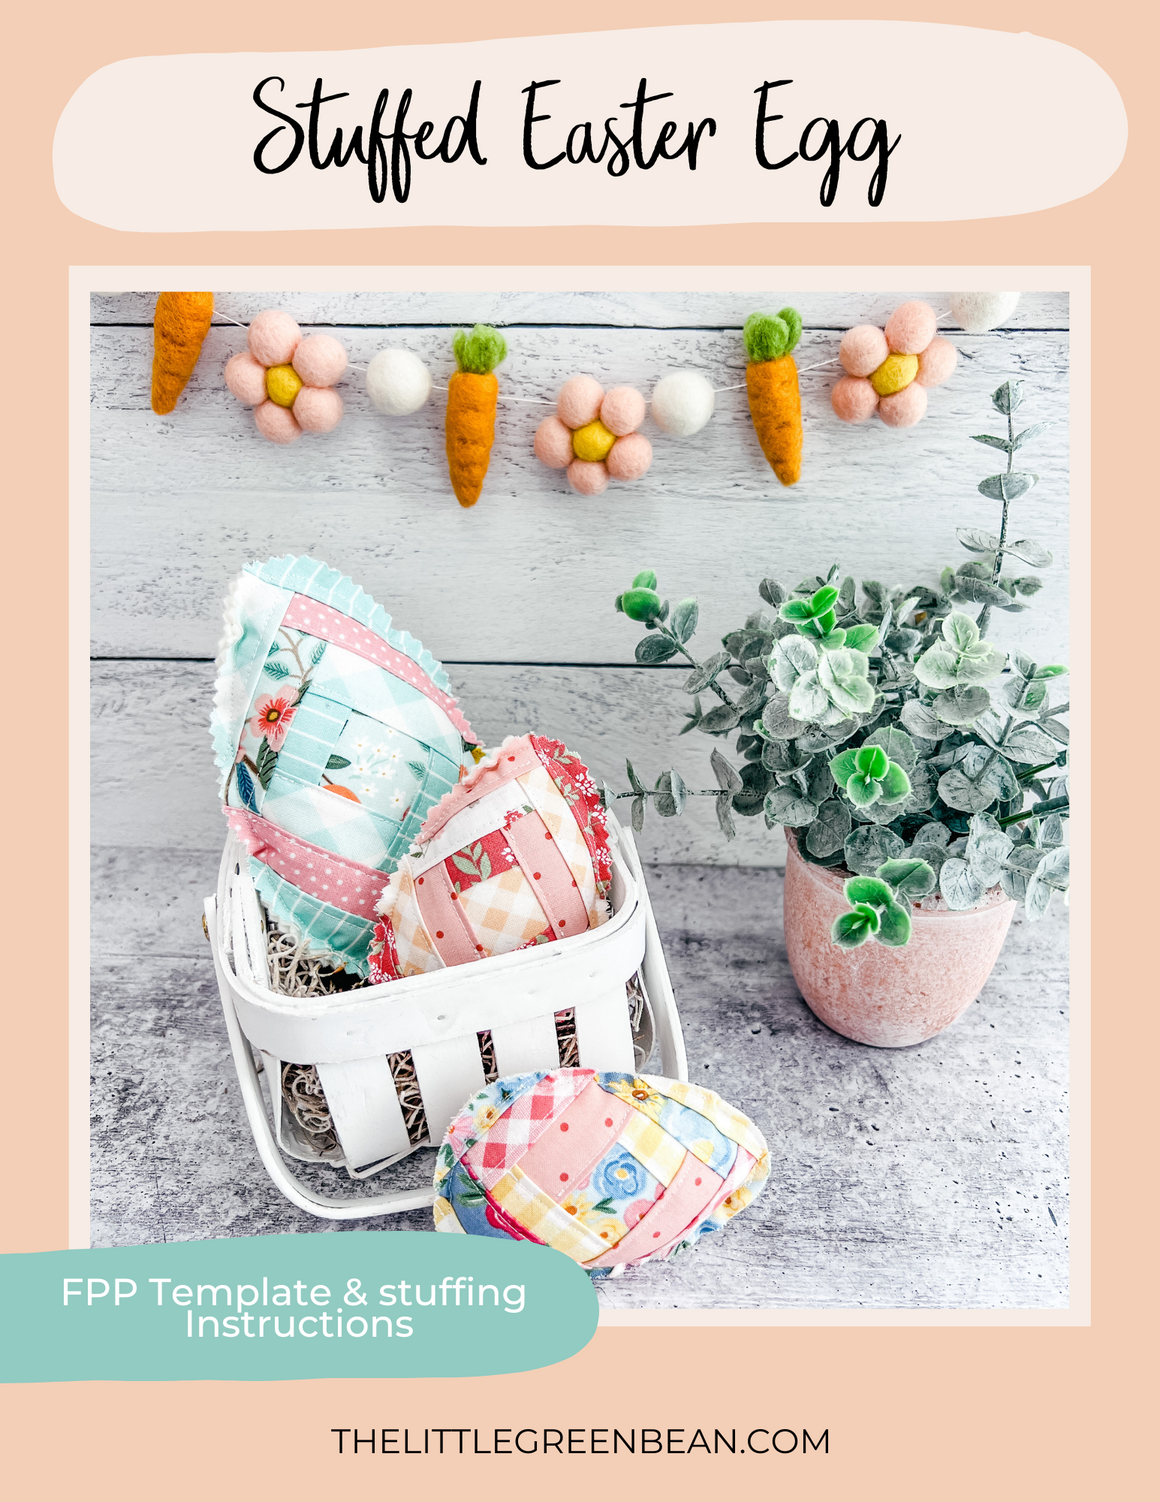 Stuffed Easter Egg | FPP Template & stuffing instructions